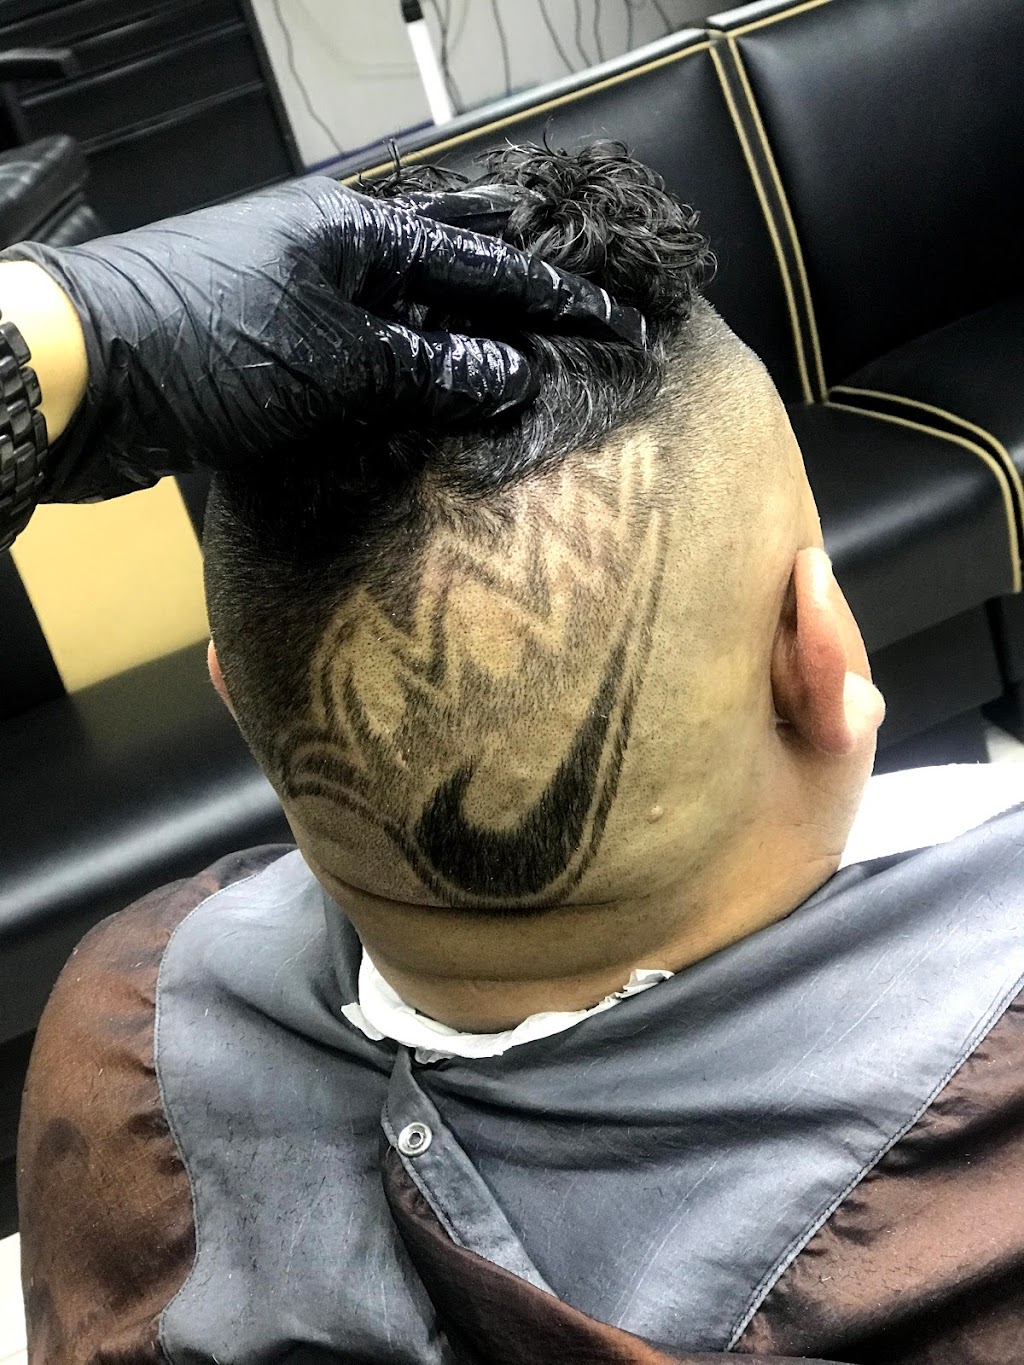 Melvin’s barbershop You don’t need appointment just come | 7234, 2443 W Emaus Ave, Allentown, PA 18103 | Phone: (484) 221-8468